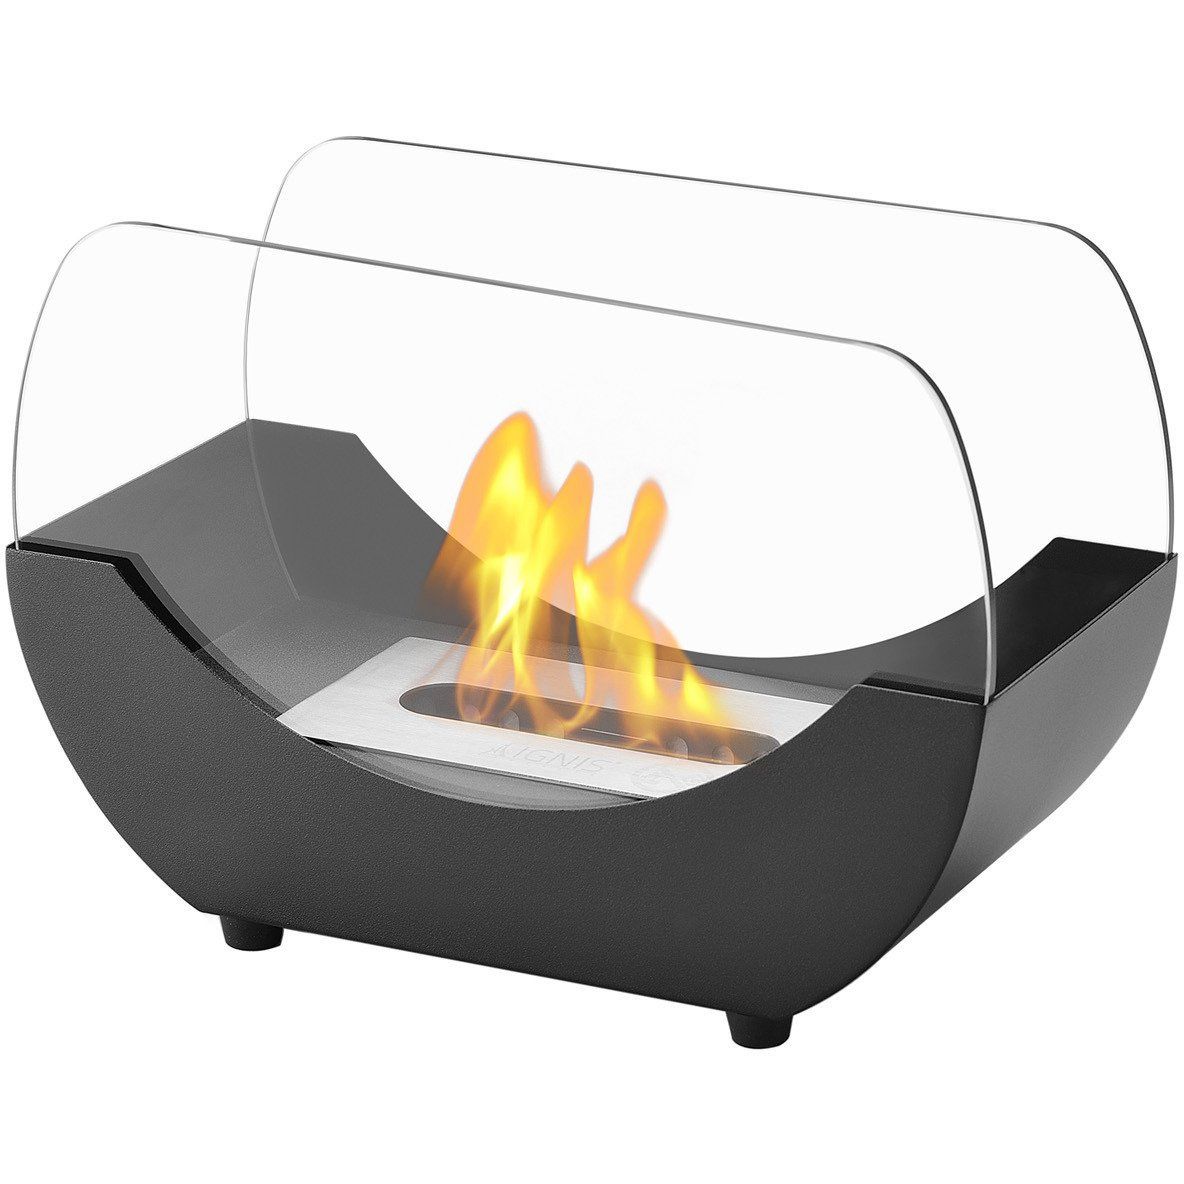 Tabletop Electric Fireplace Beautiful Liberty Black Tabletop Ventless Ethanol Fireplace